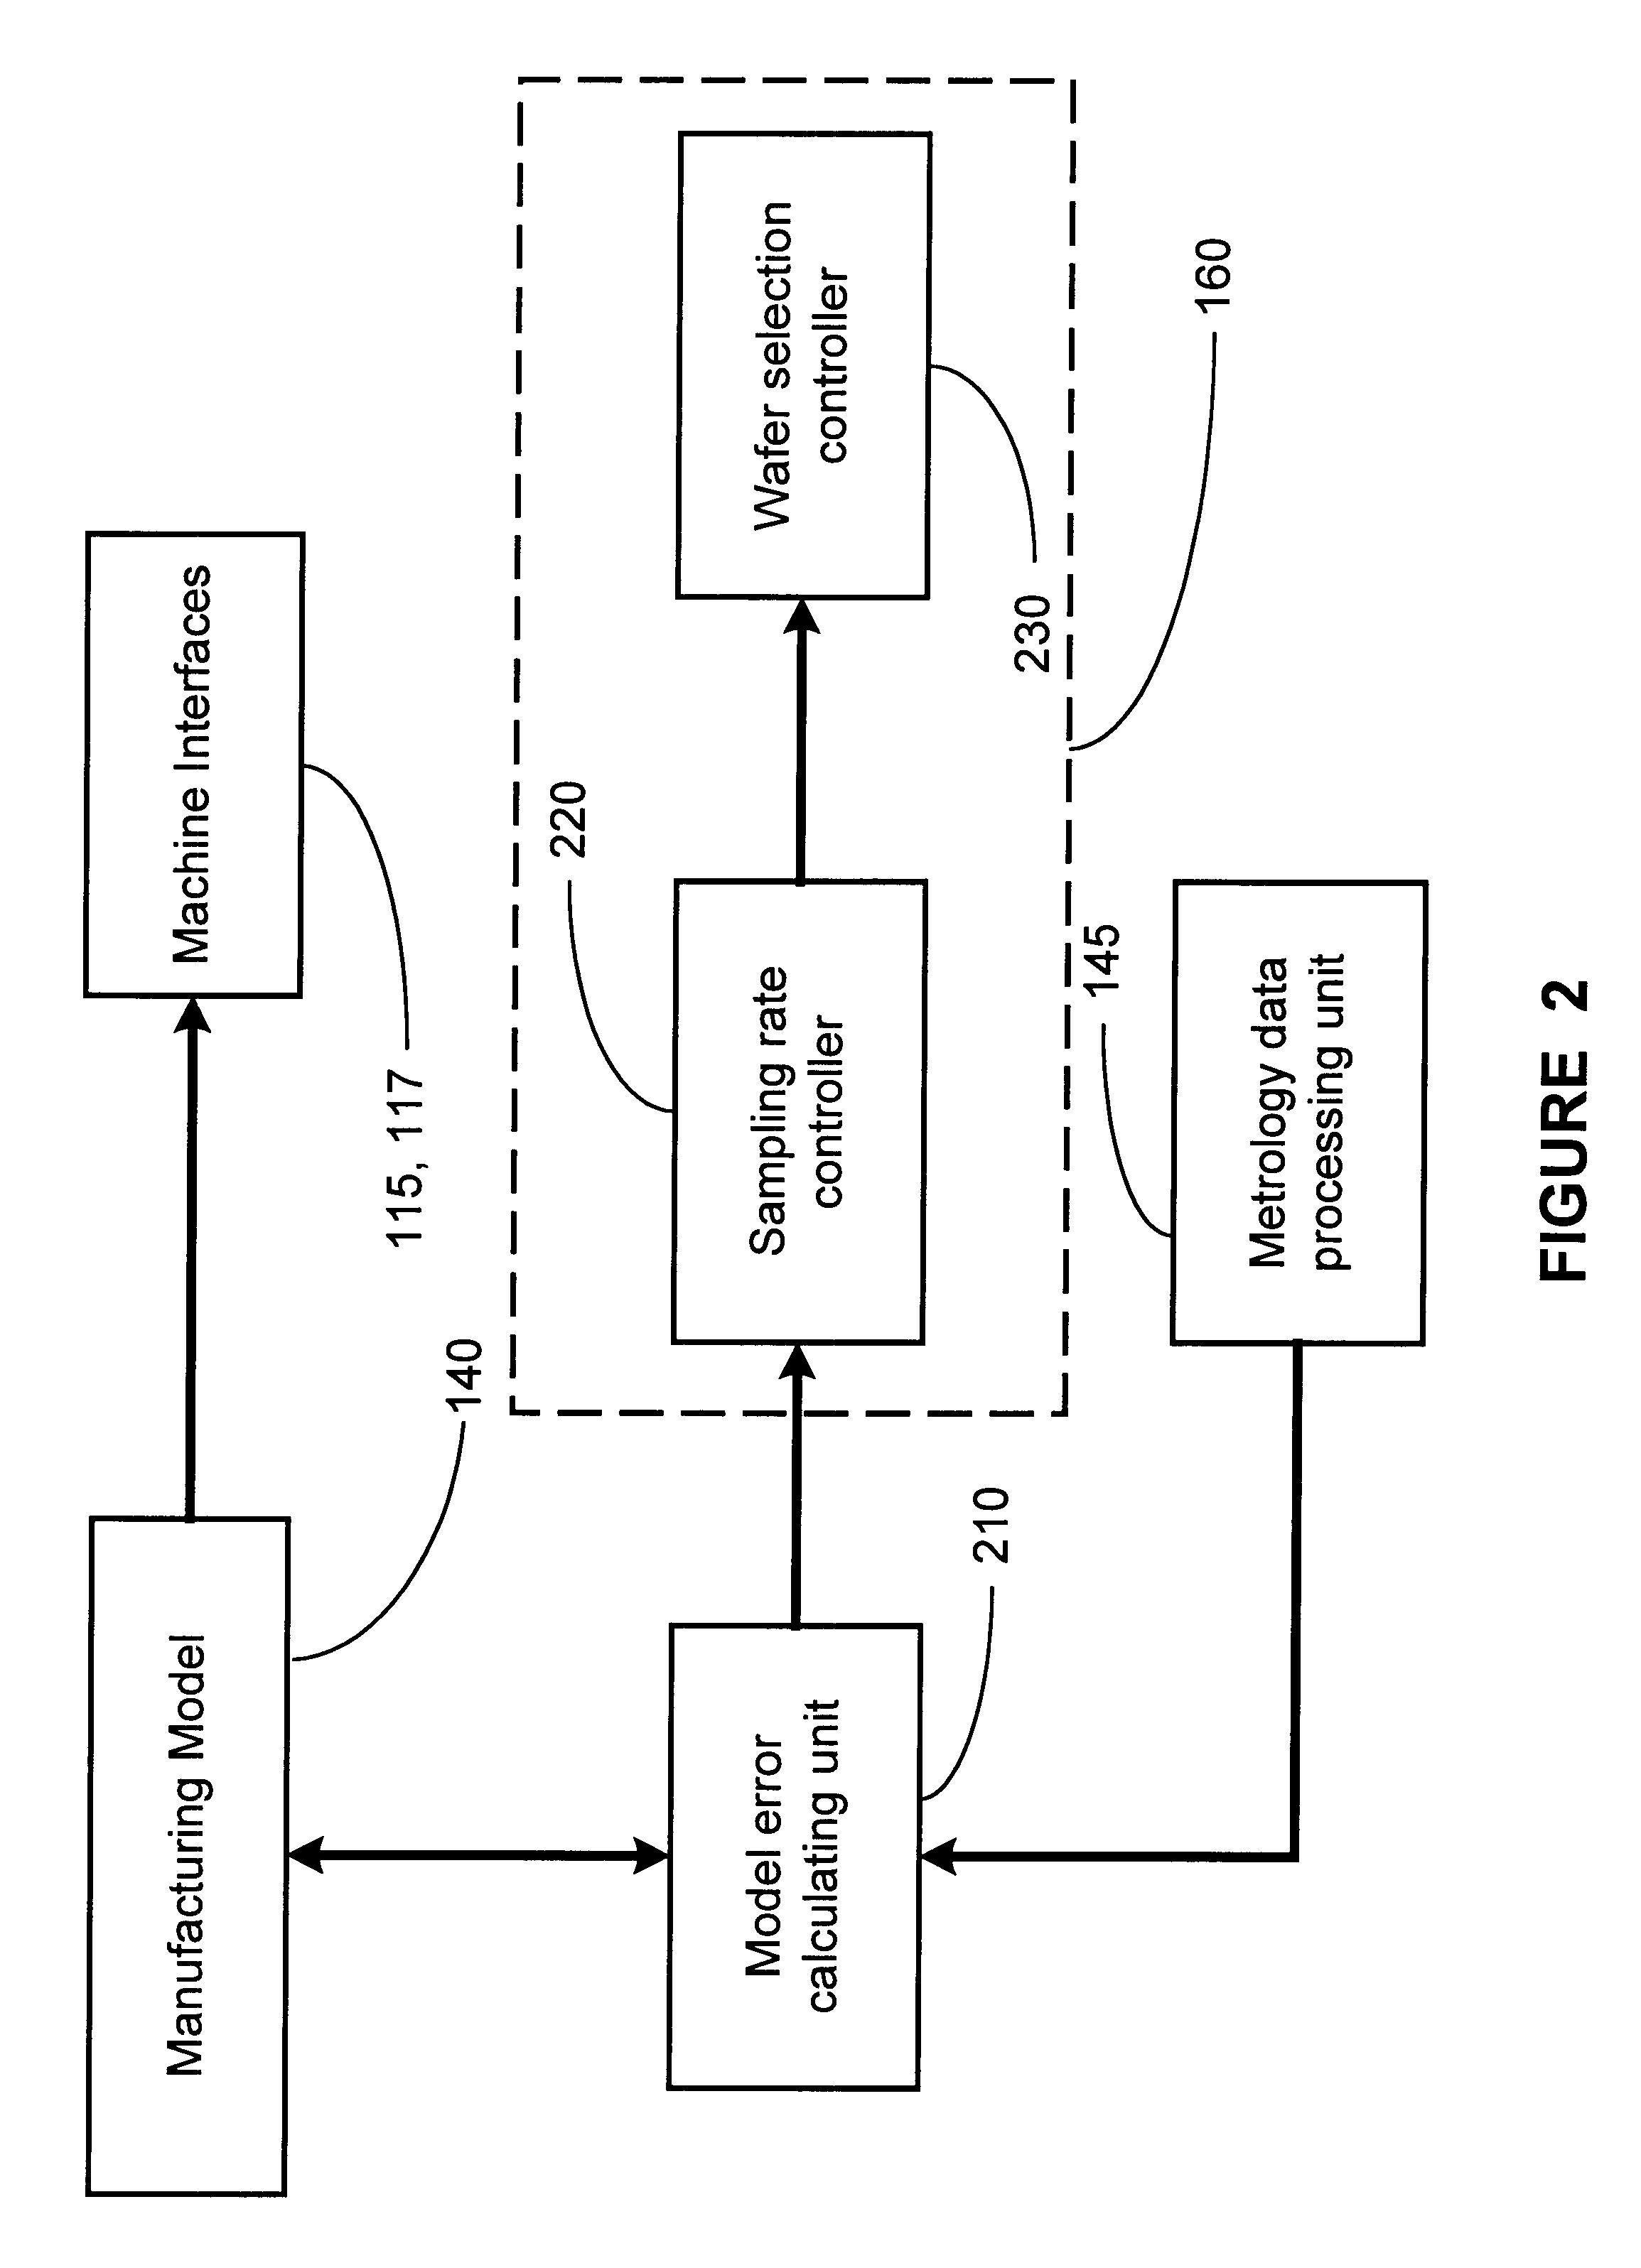 Method and apparatus for dynamic sampling of a production line